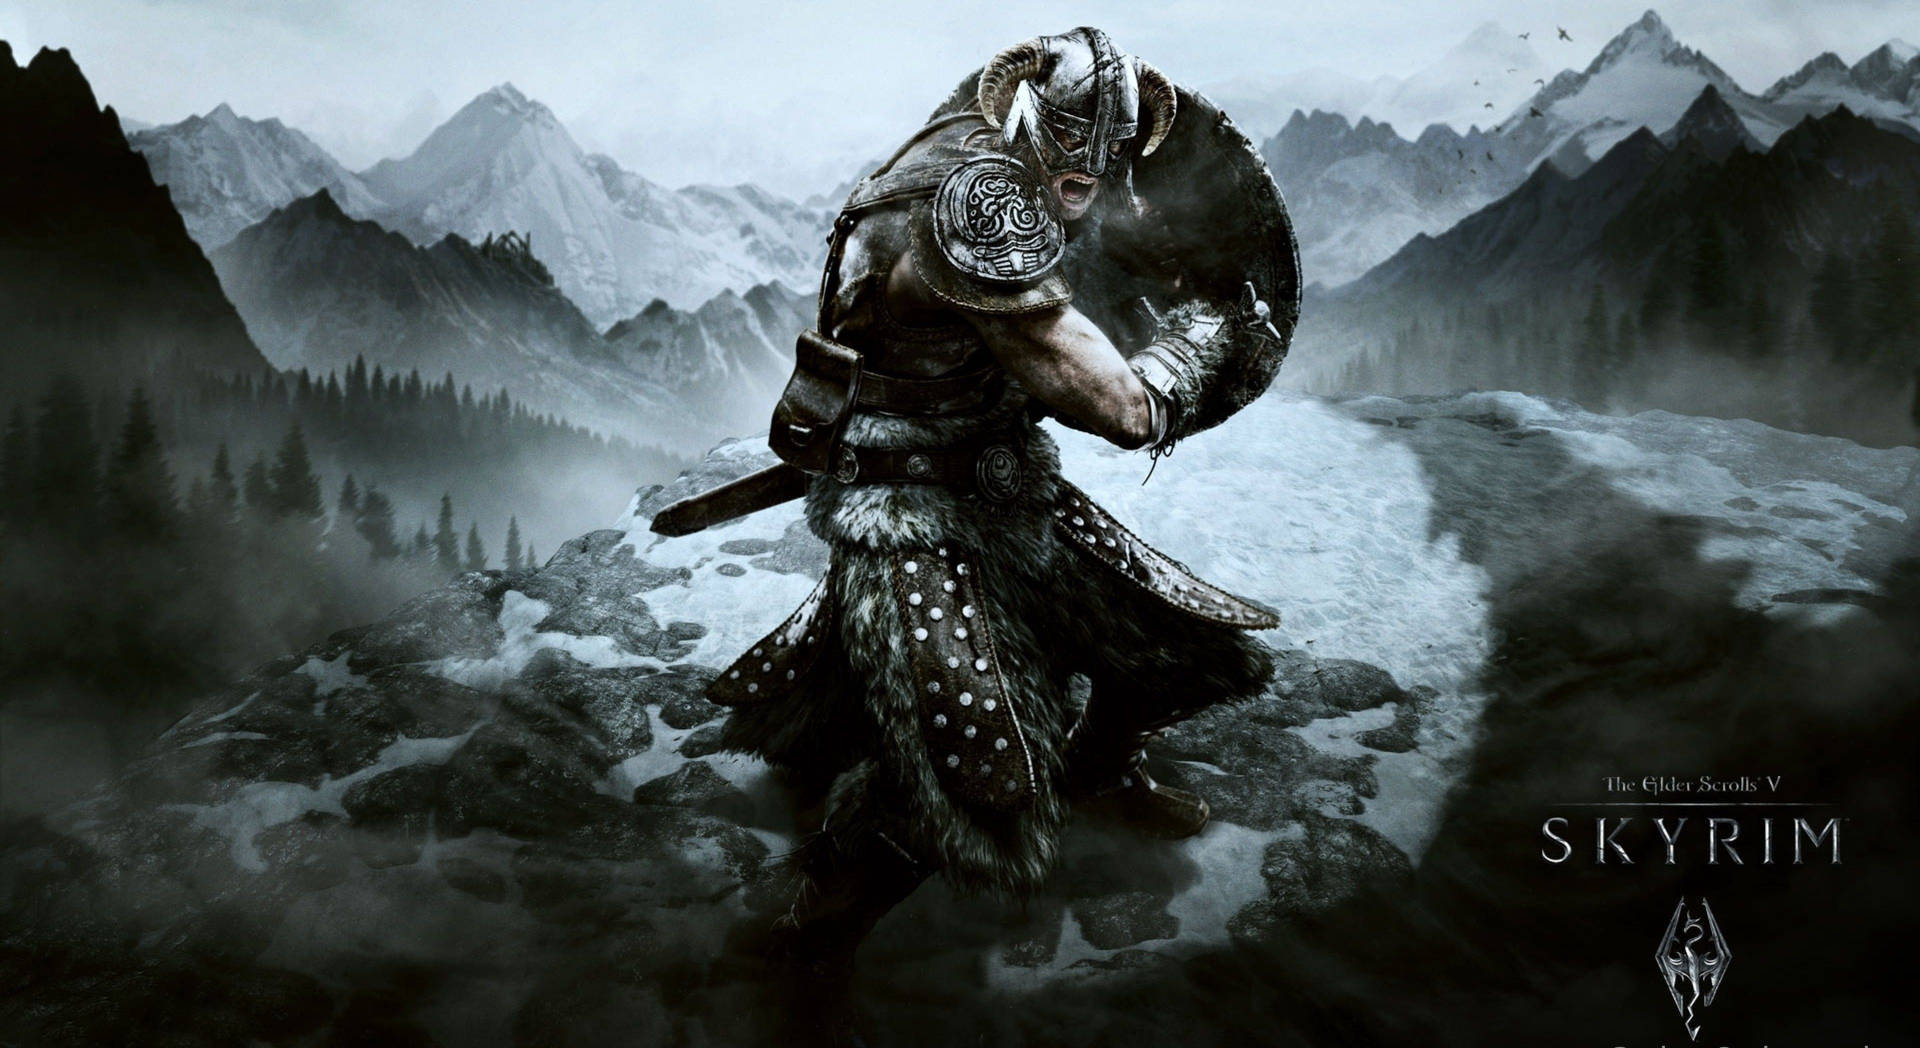 Immerse yourself in the mythical world of Tamriel in Skyrim Ultra HD Wallpaper